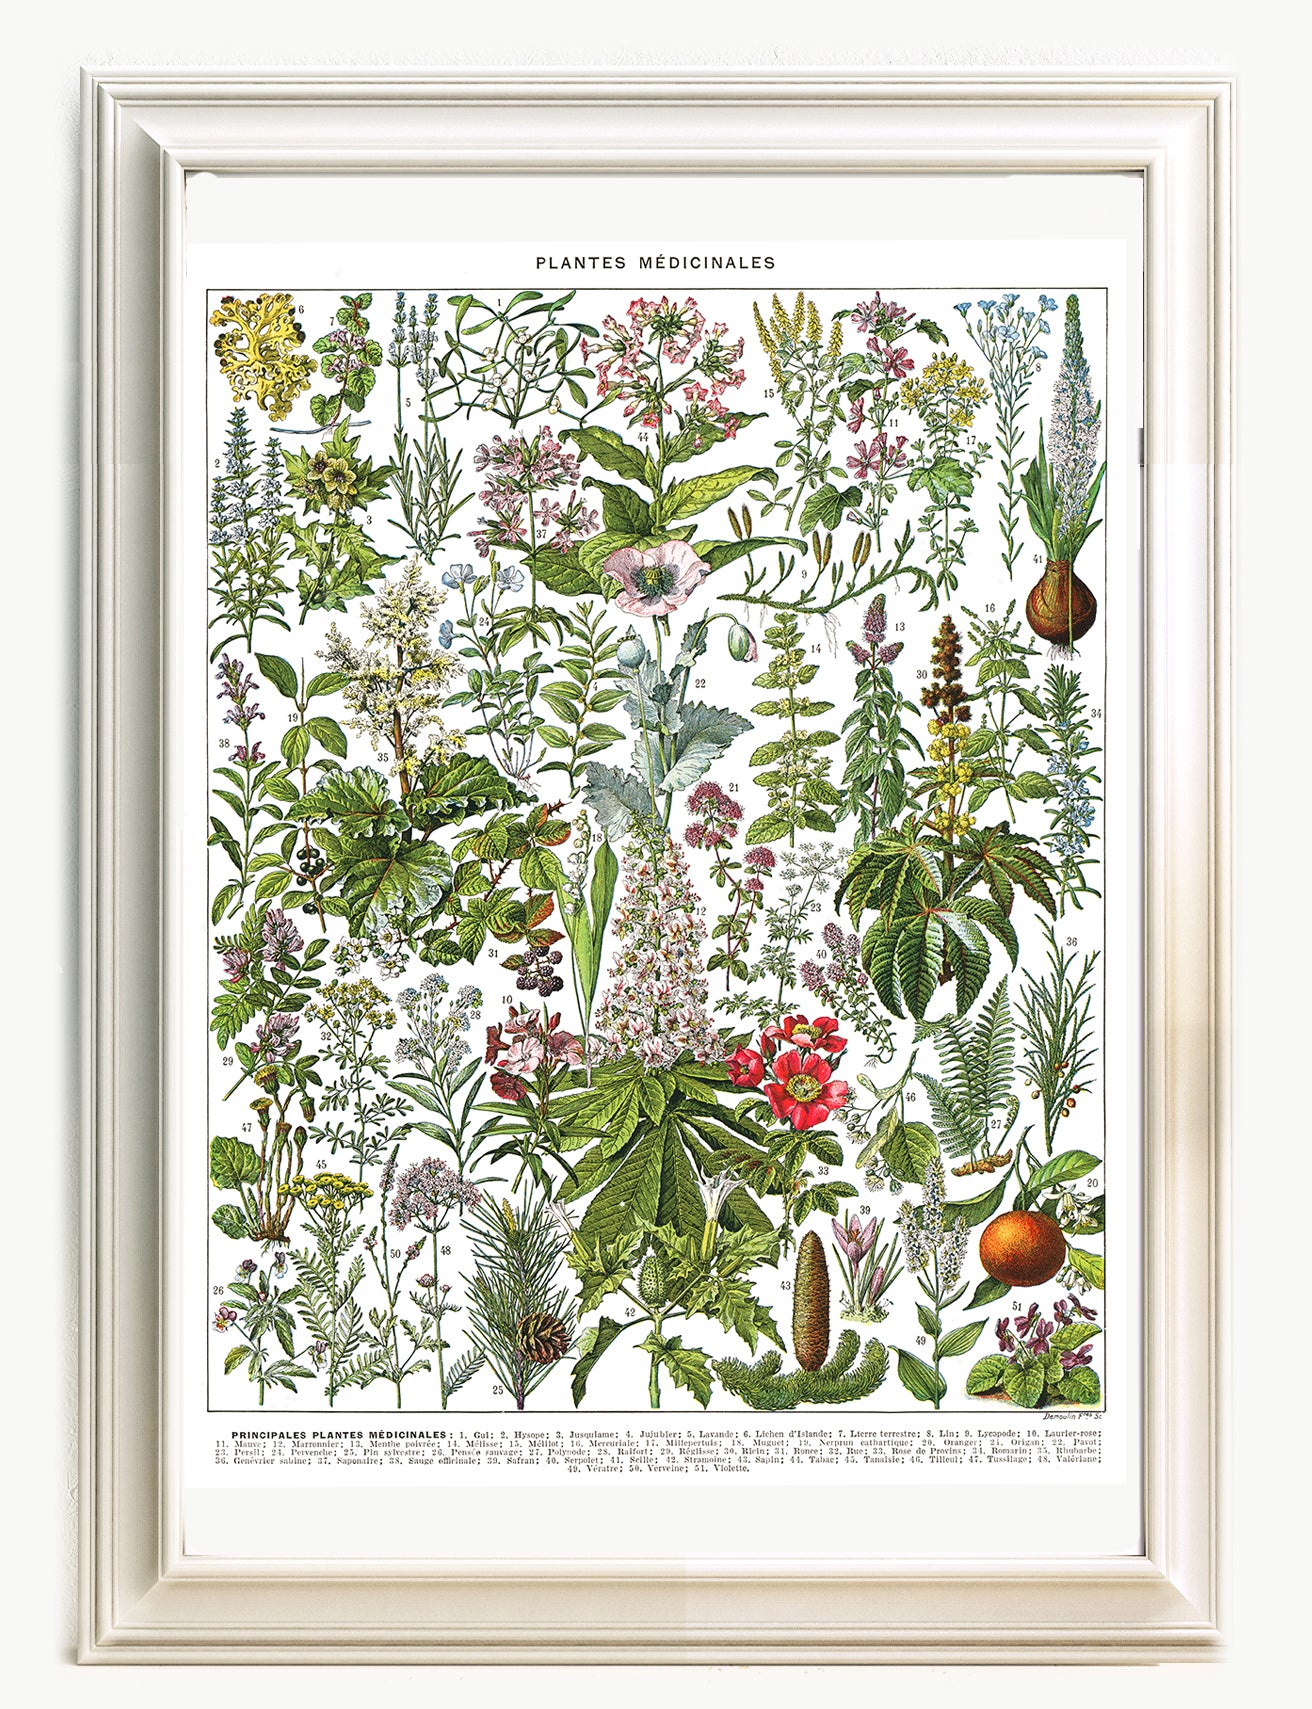 Large medicinal plants botanical poster G to Z by Adolphe Millot